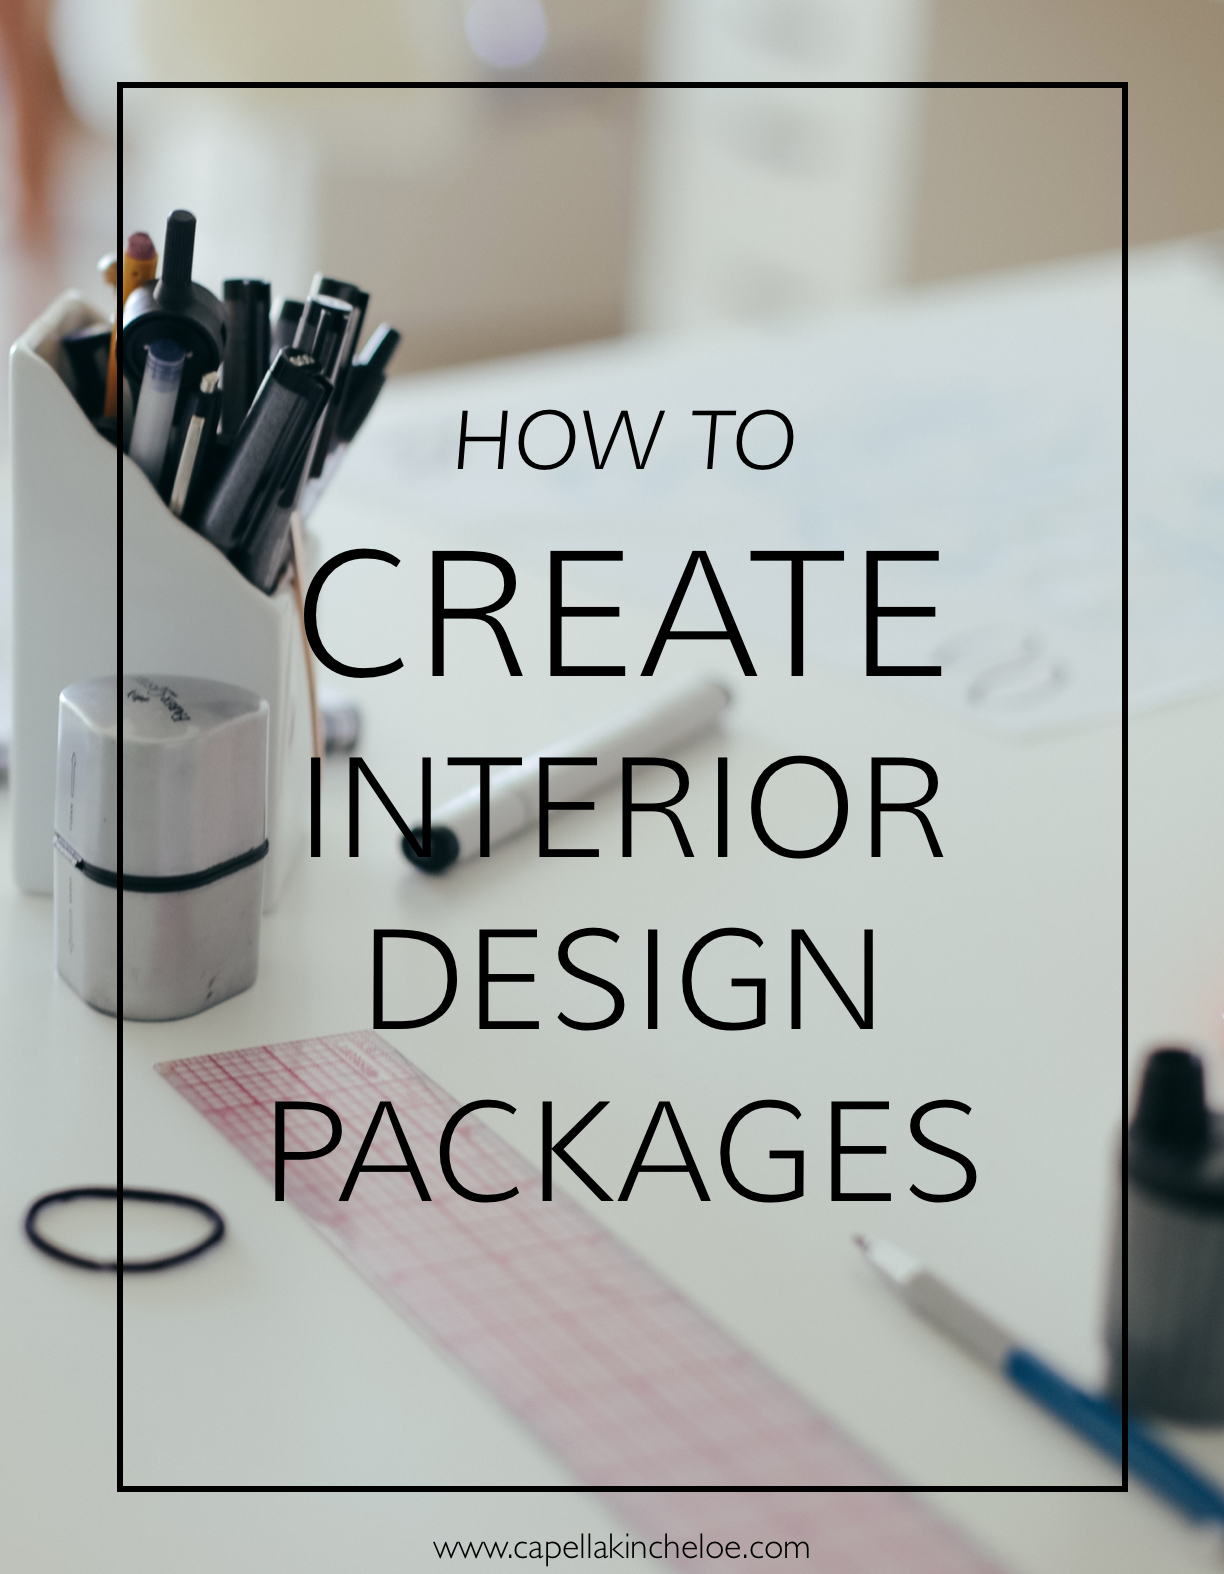 How to Create Interior Design Packages